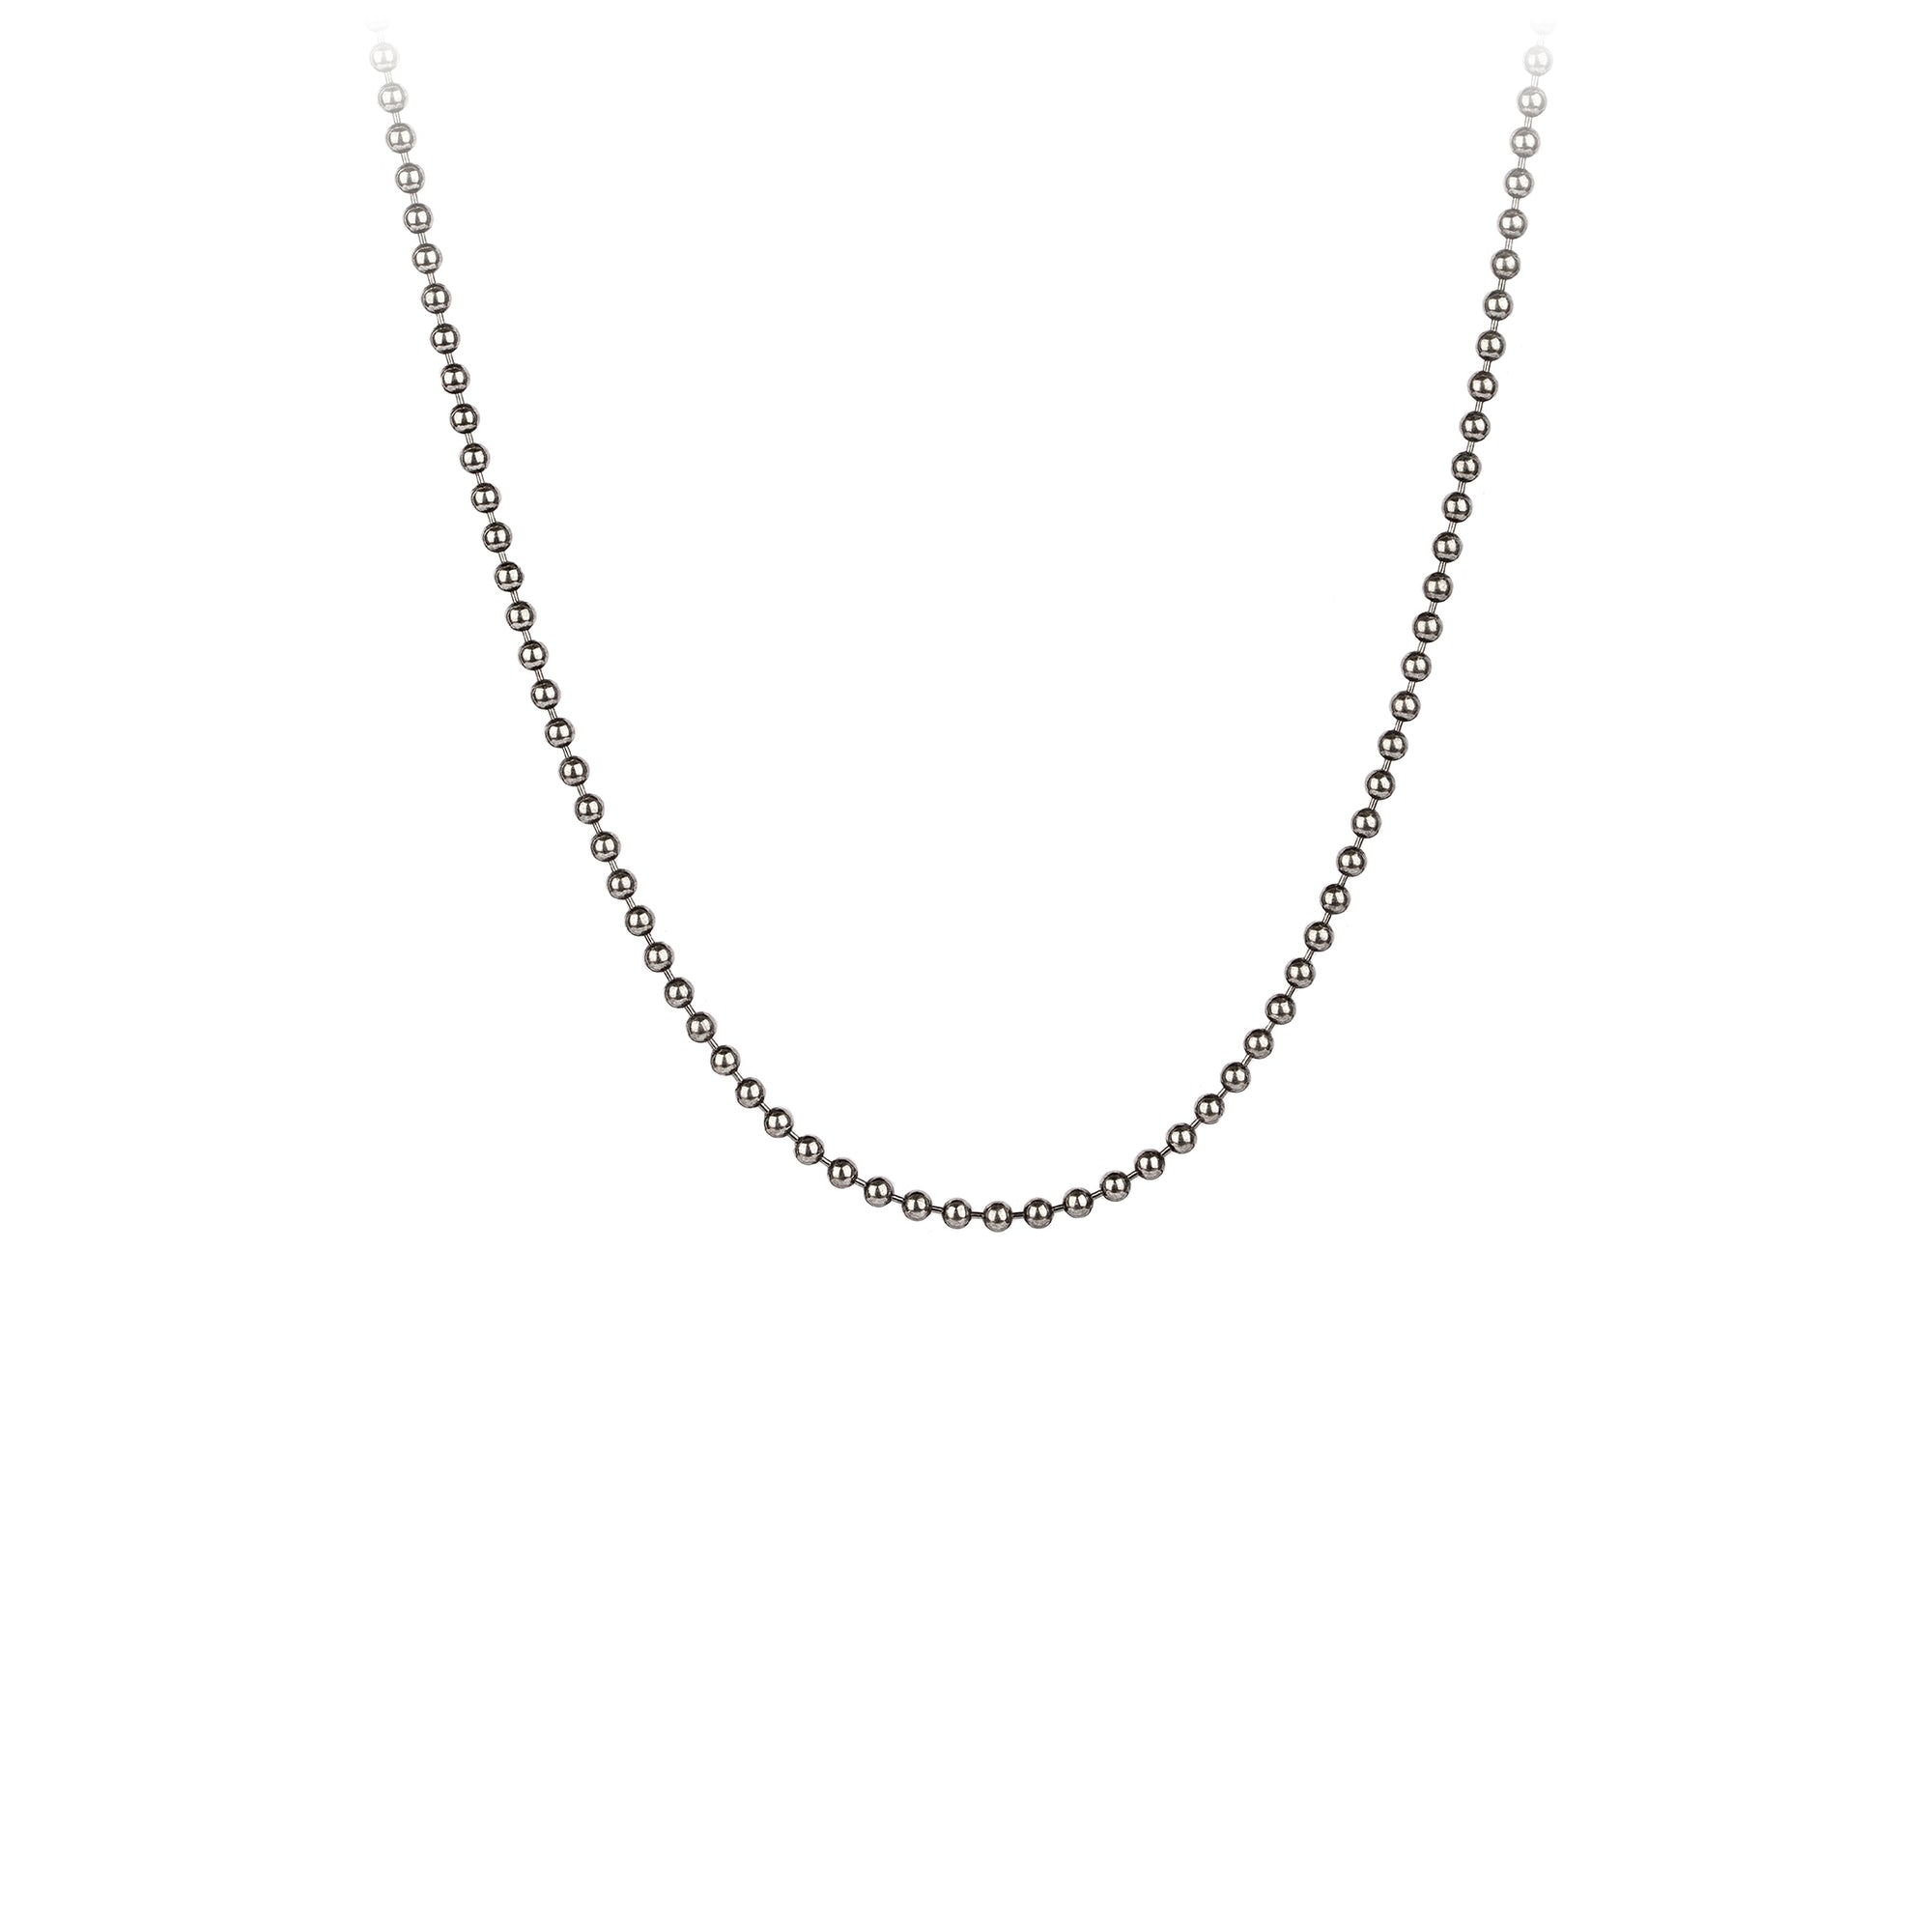 A sterling silver chain with heavy ball links